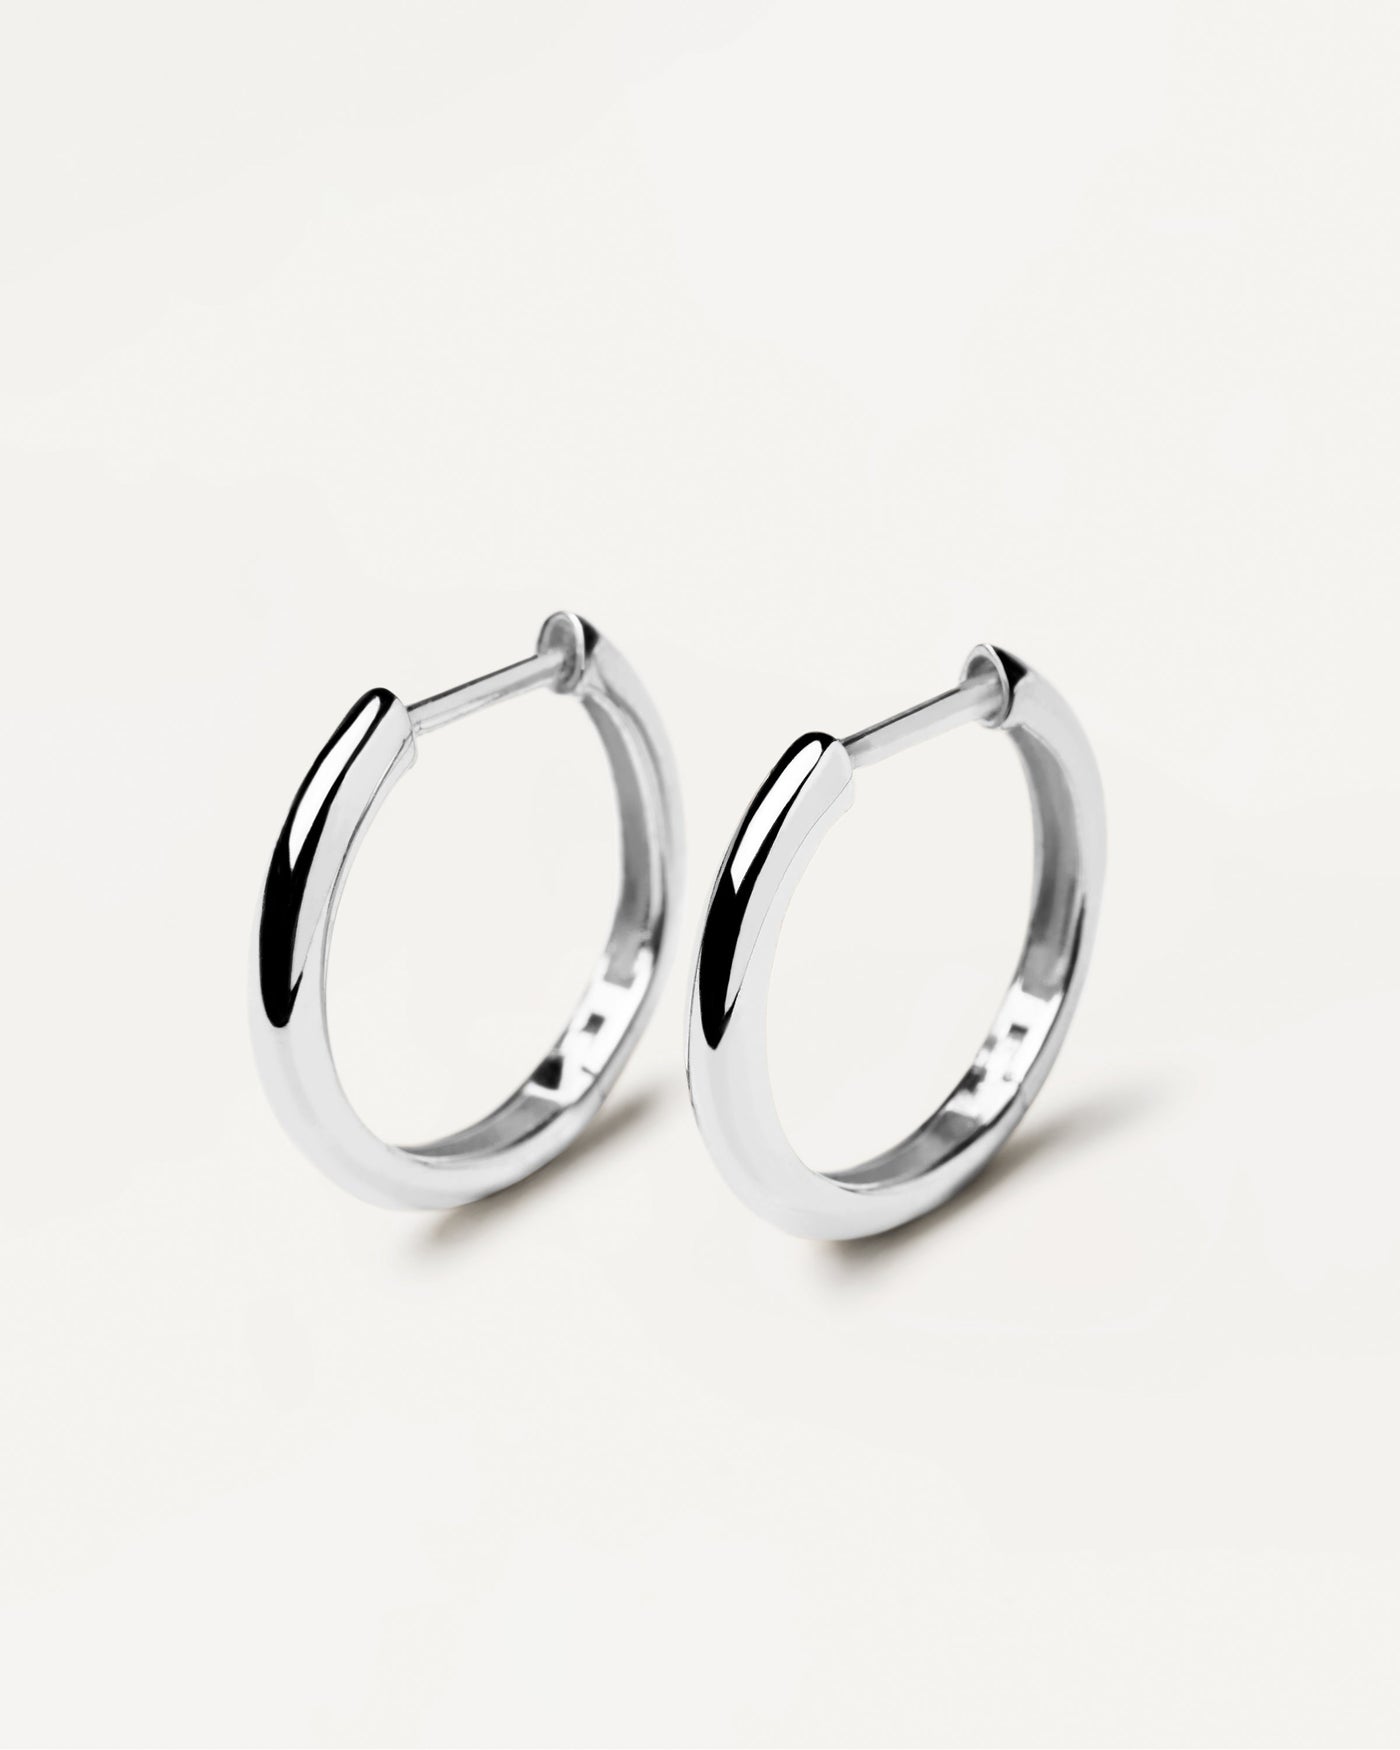 2023 Selection | White Gold Bold Medium Hoops. Plain solid white gold hoops made of recycled gold. Get the latest arrival from PDPAOLA. Place your order safely and get this Best Seller. Free Shipping.